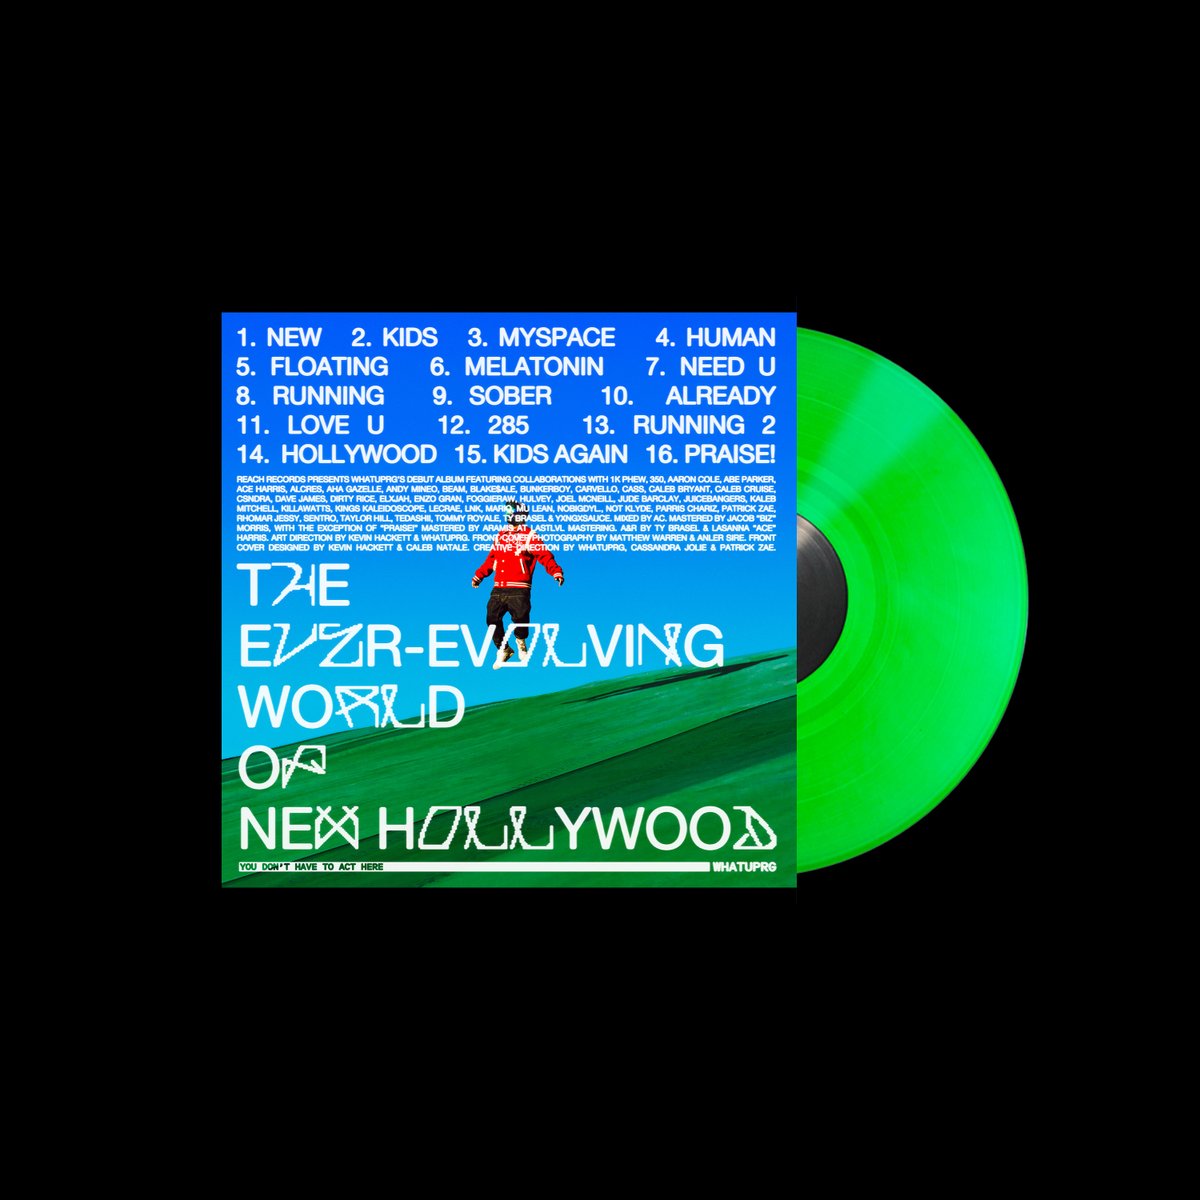 ✅ COVER ✅ TRACKLIST Next up, RELEASE. NEW HOLLYWOOD DROPPING FRIDAY !! Pre-order NH vinyl HERE: whatuprg.ffm.to/newhollywood